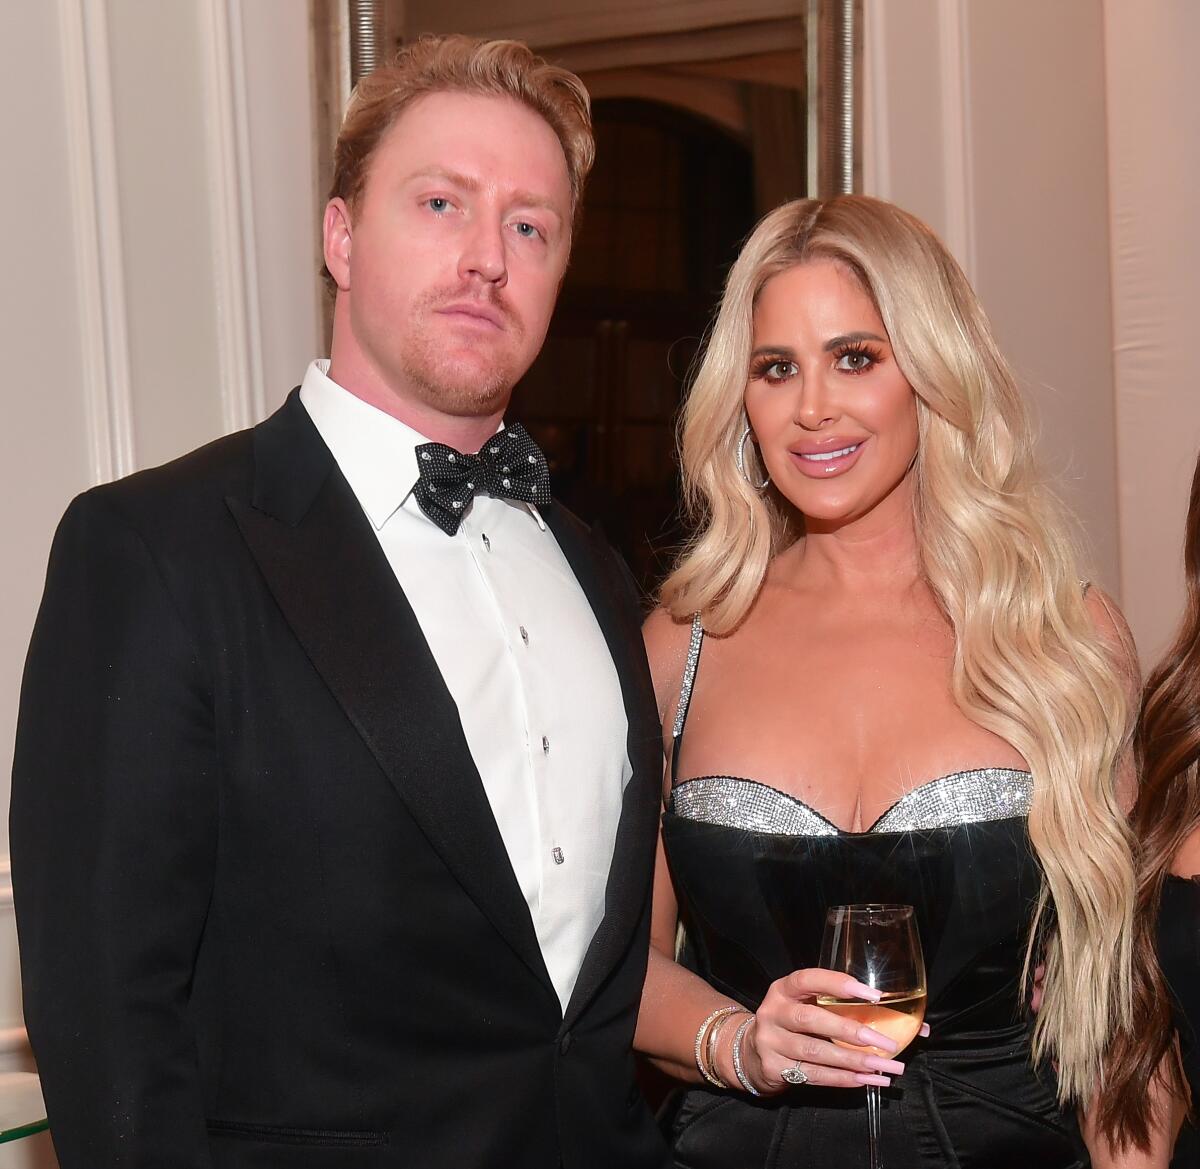 Kroy Biermann in a tuxedo and Kim Zolciak in a form-fitting black gown with silver trim